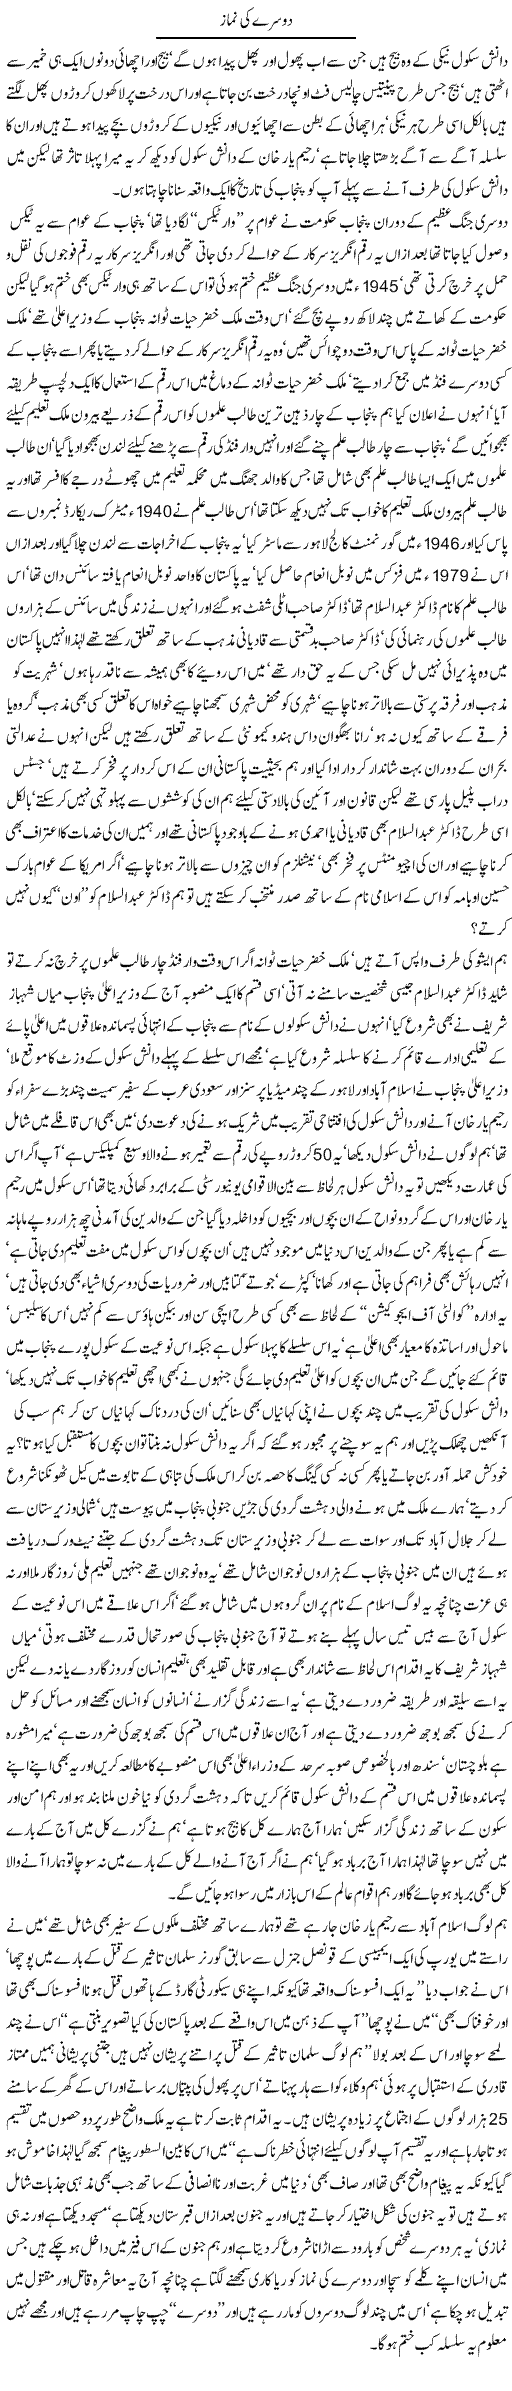 Education and institutes in Pakistan, Shahbaz-Shareef steps about educational system